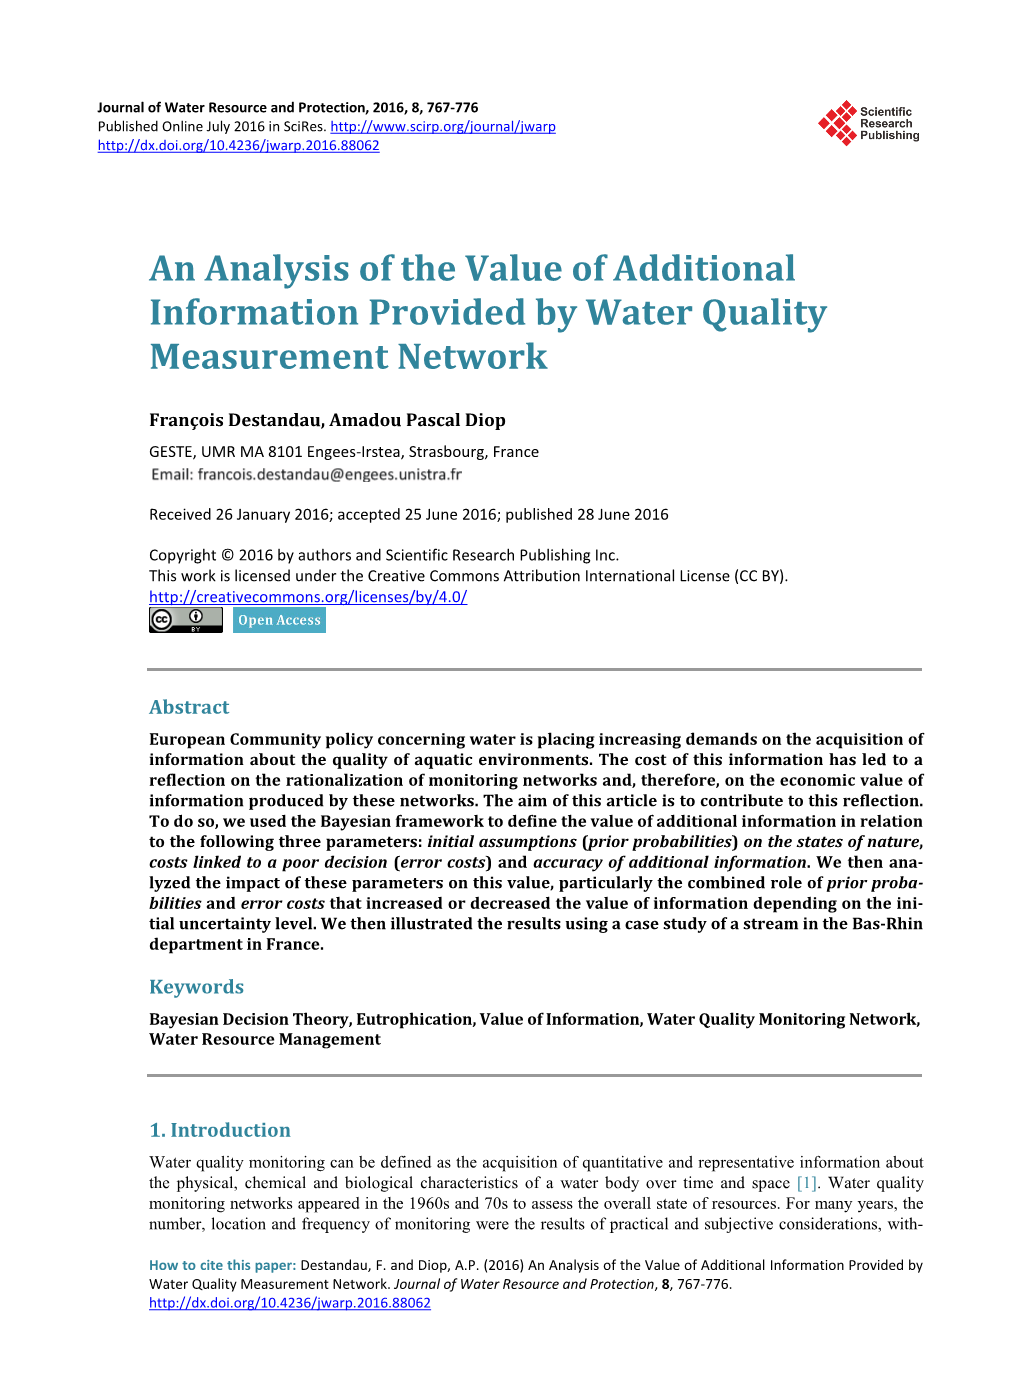 An Analysis of the Value of Additional Information Provided by Water Quality Measurement Network